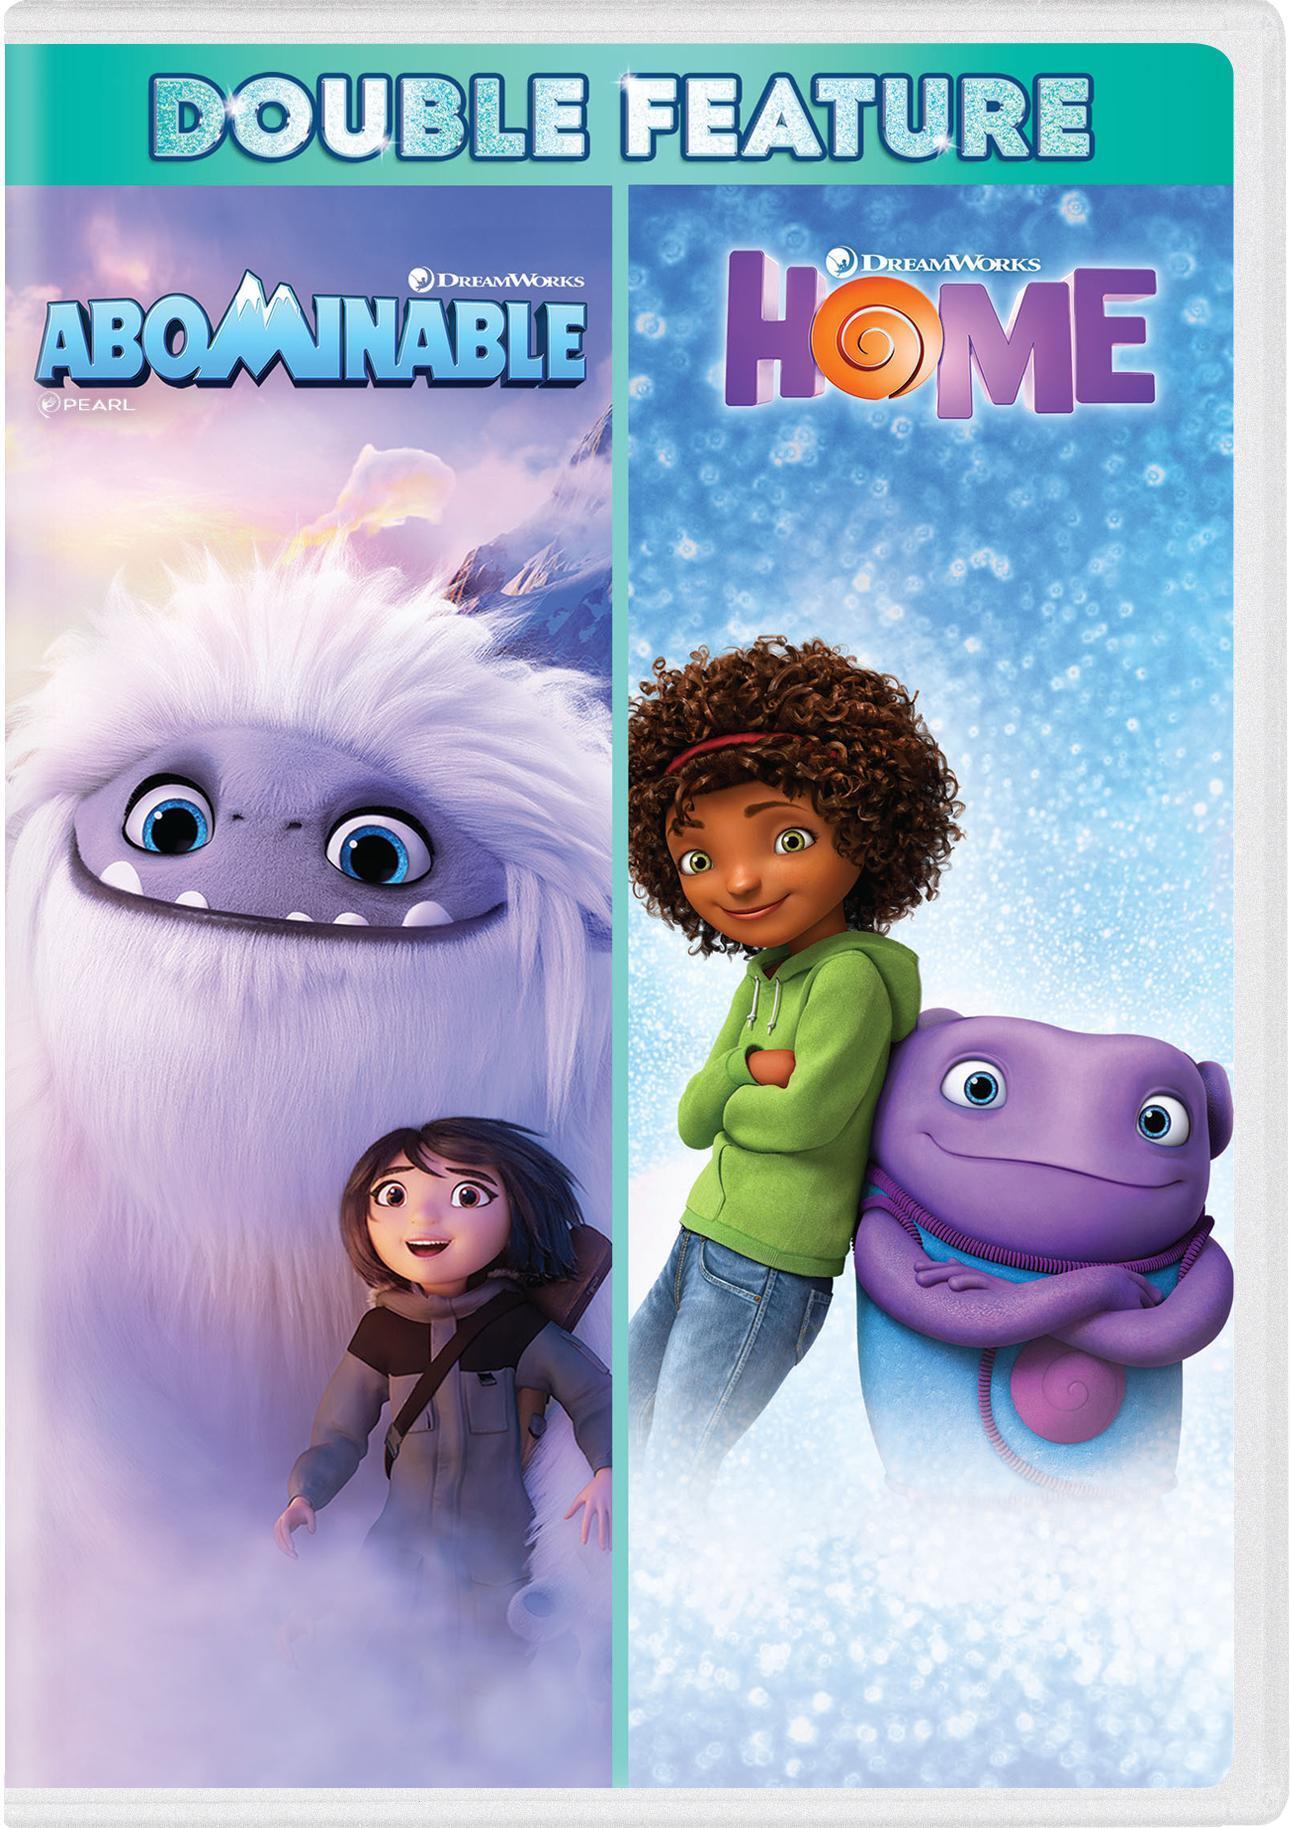 Abominable/Home - DVD   - Animation Movies On DVD - Movies On GRUV